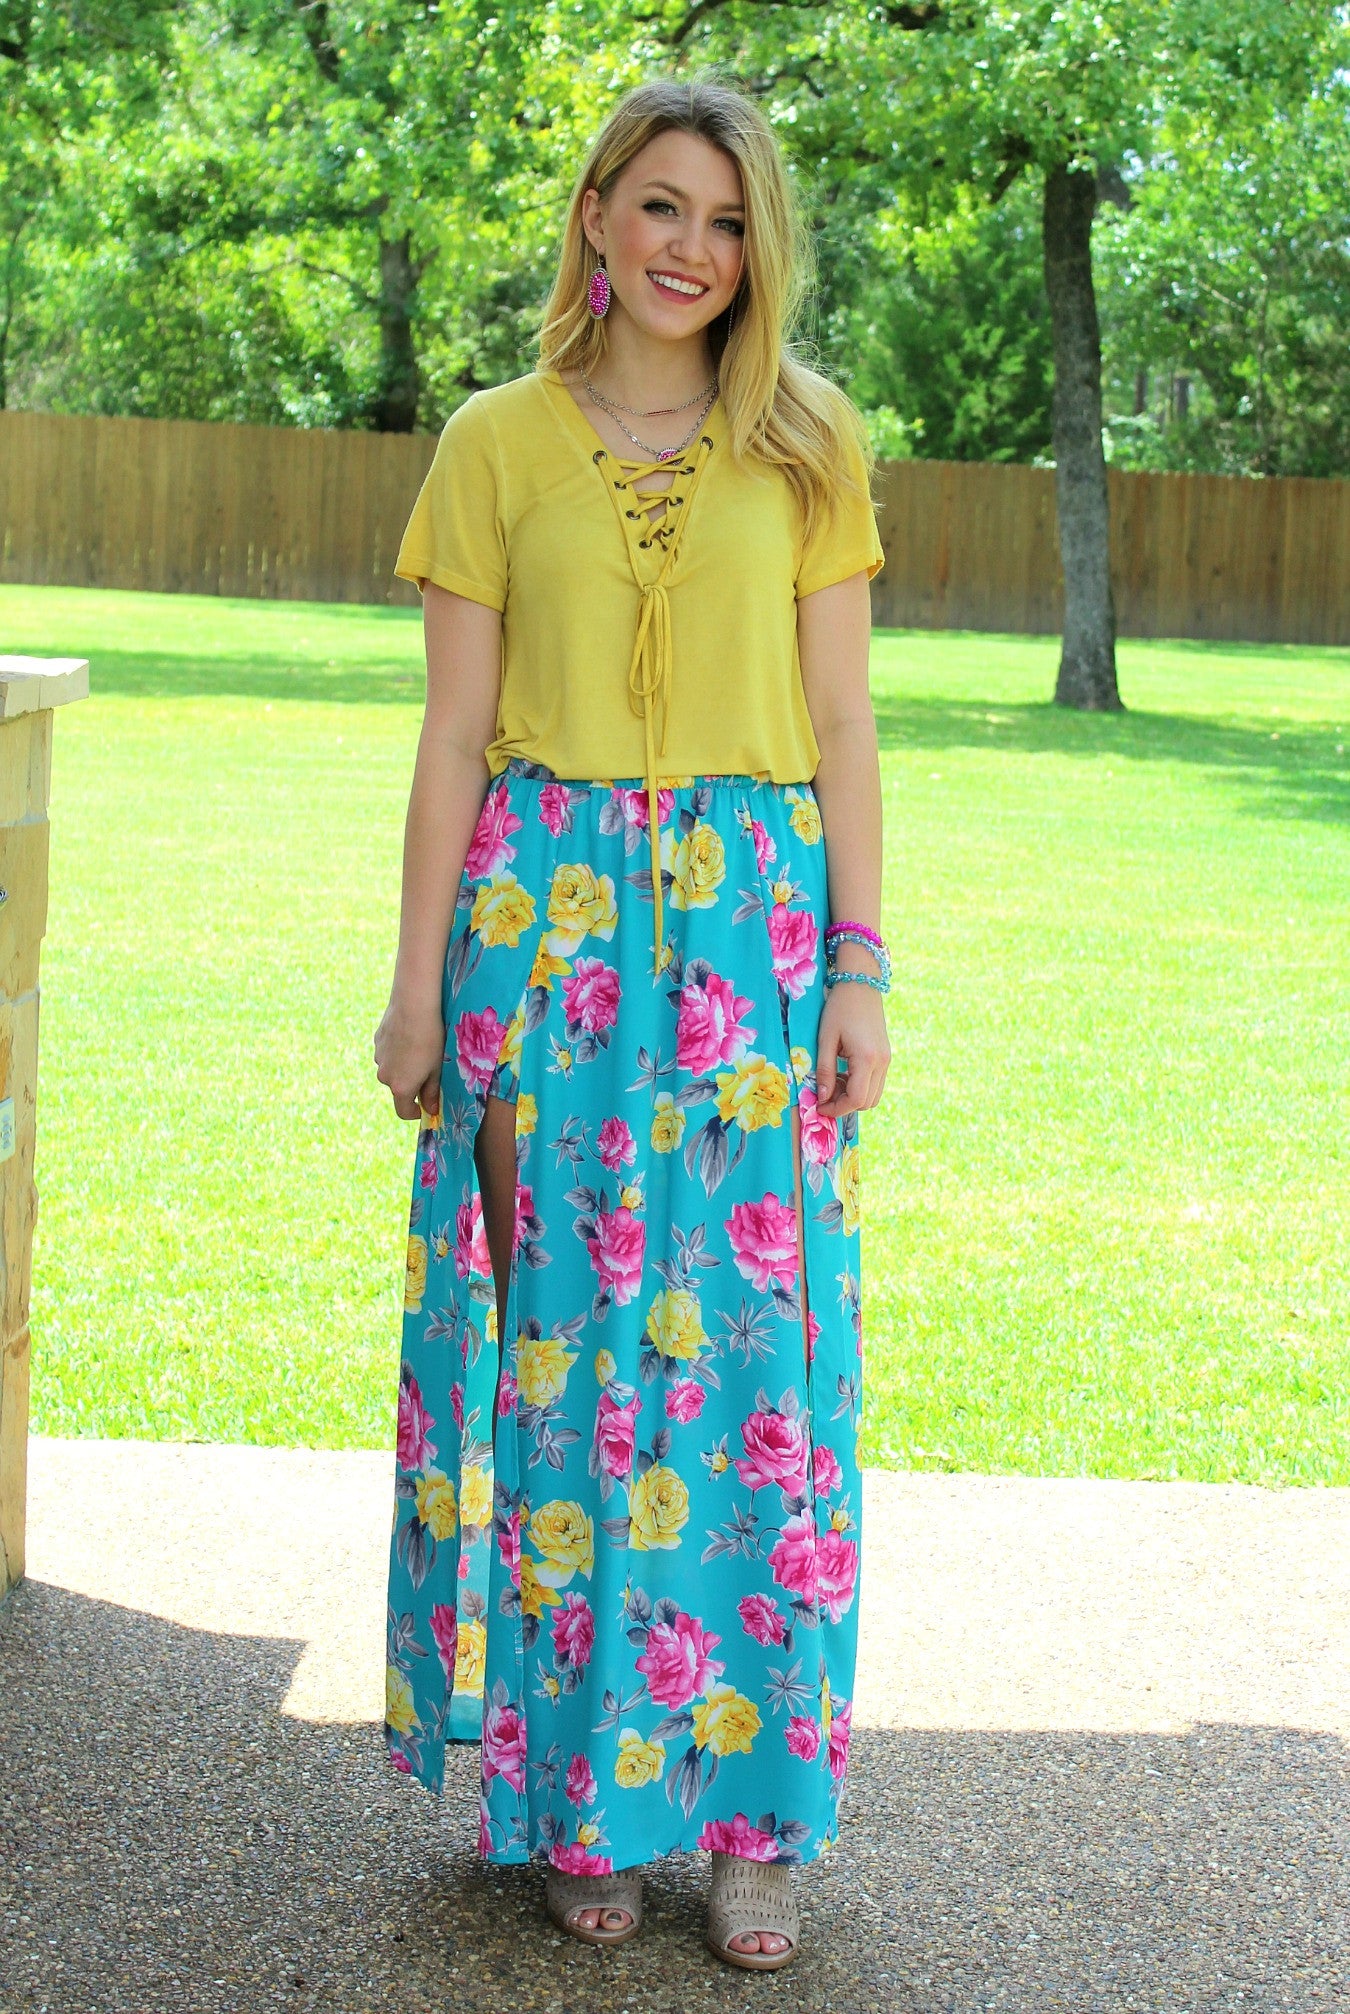 Last Chance Size Small | Floral Fever Turquoise Maxi Skirt - Giddy Up Glamour Boutique